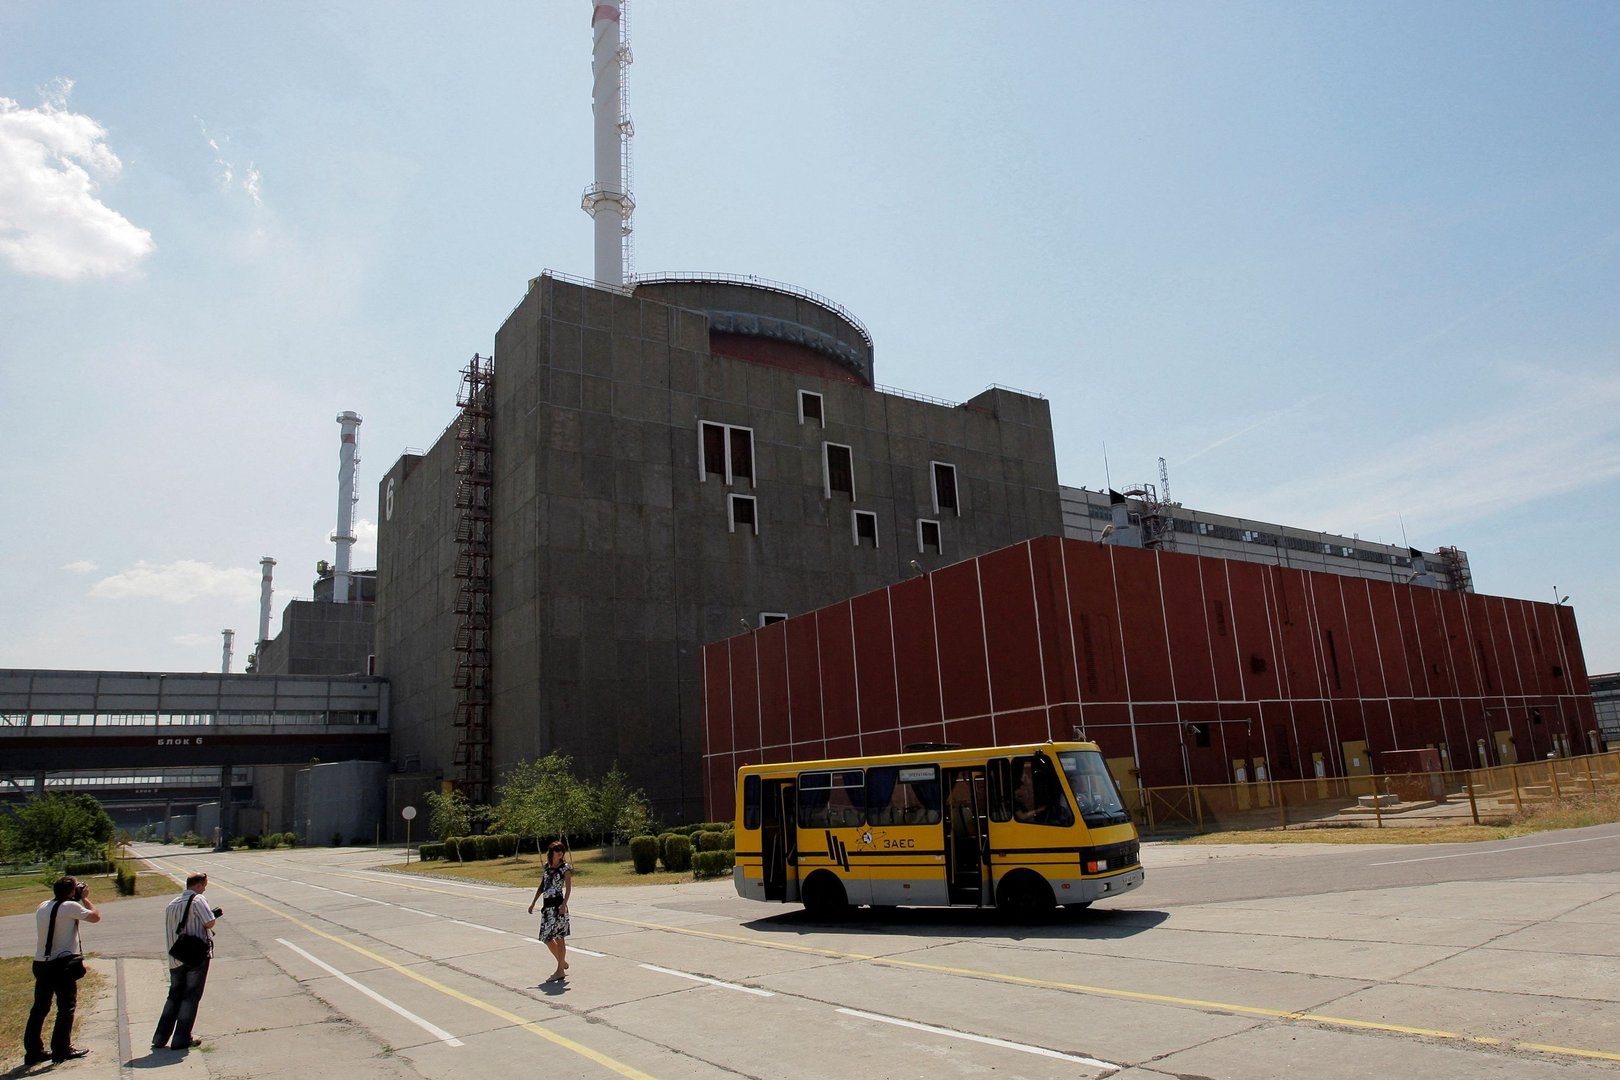 image Russian-held nuclear plant faces critical shortage of spare parts, says Kyiv